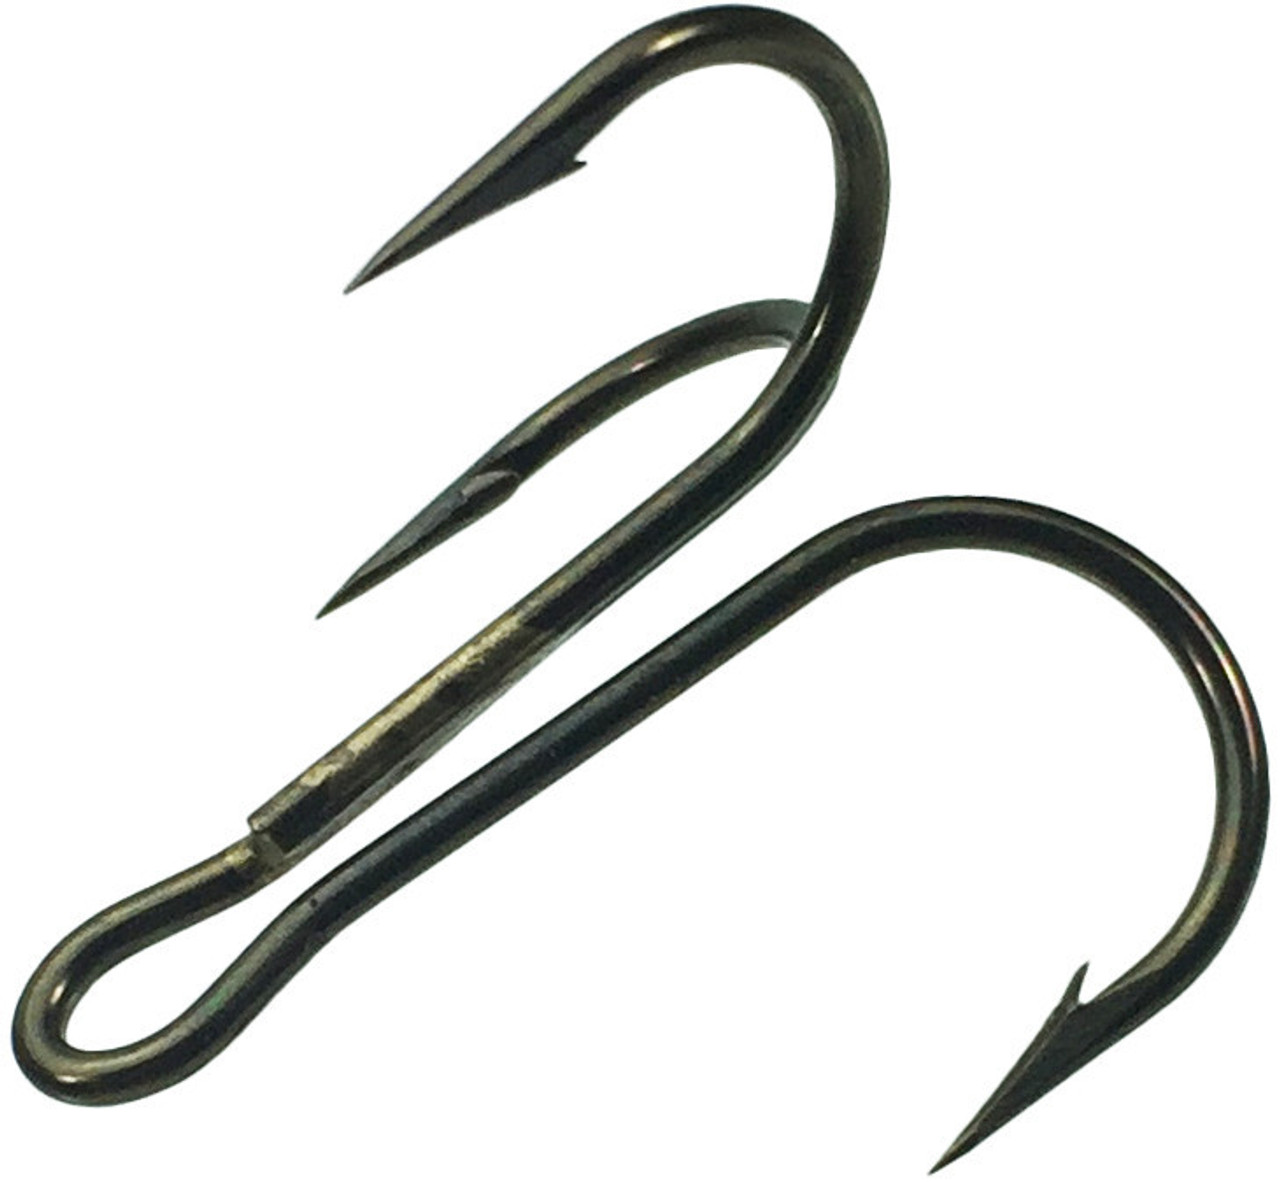 Treble Hook Replacement